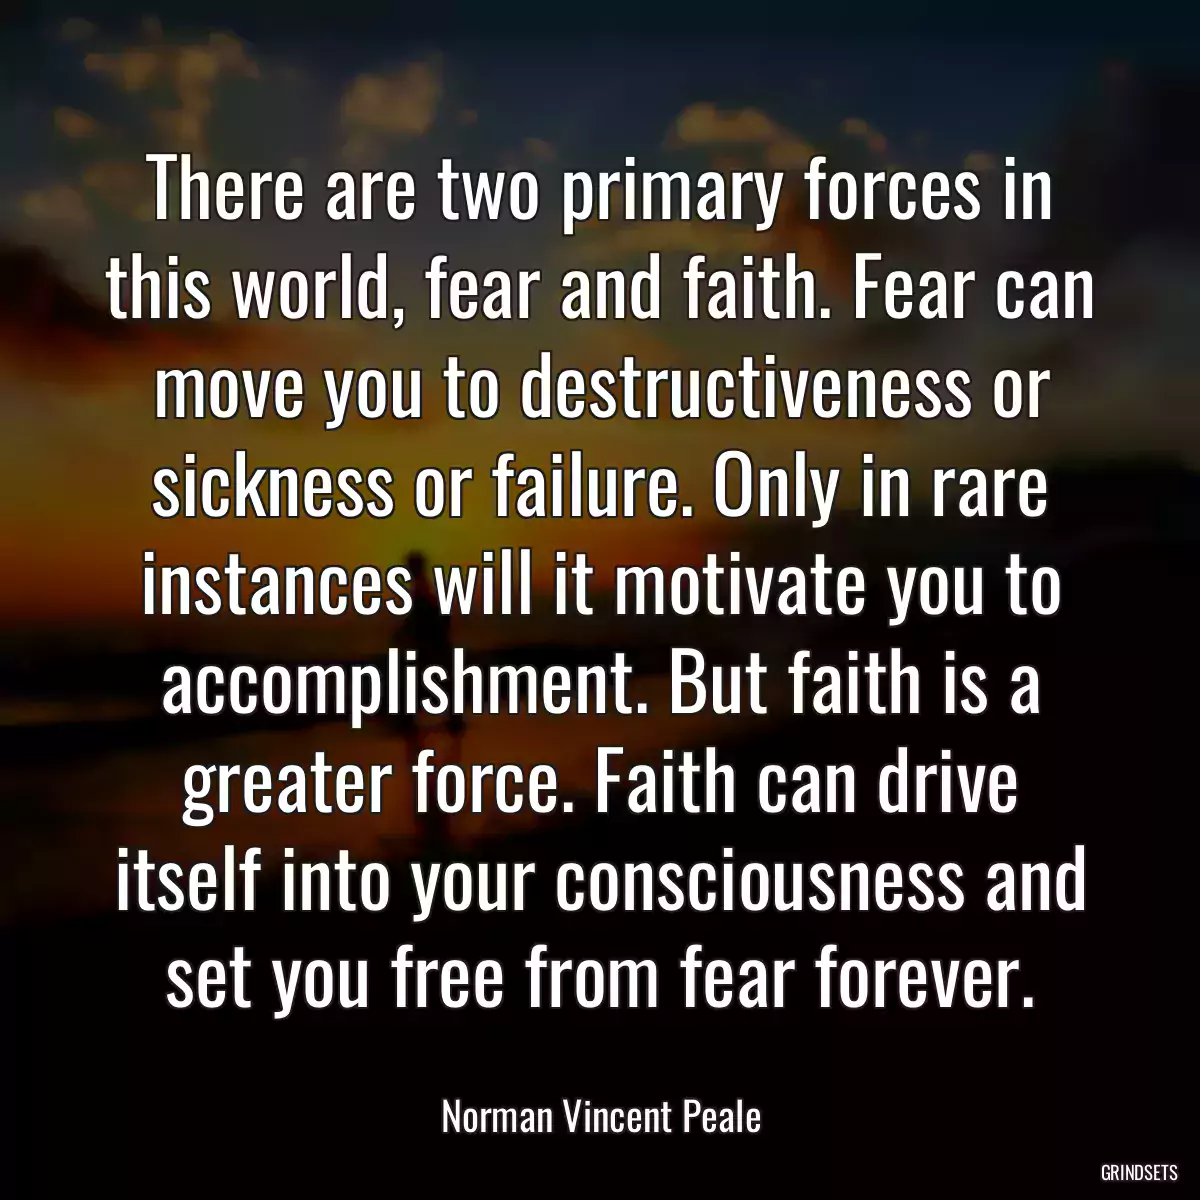 There are two primary forces in this world, fear and faith. Fear can move you to destructiveness or sickness or failure. Only in rare instances will it motivate you to accomplishment. But faith is a greater force. Faith can drive itself into your consciousness and set you free from fear forever.